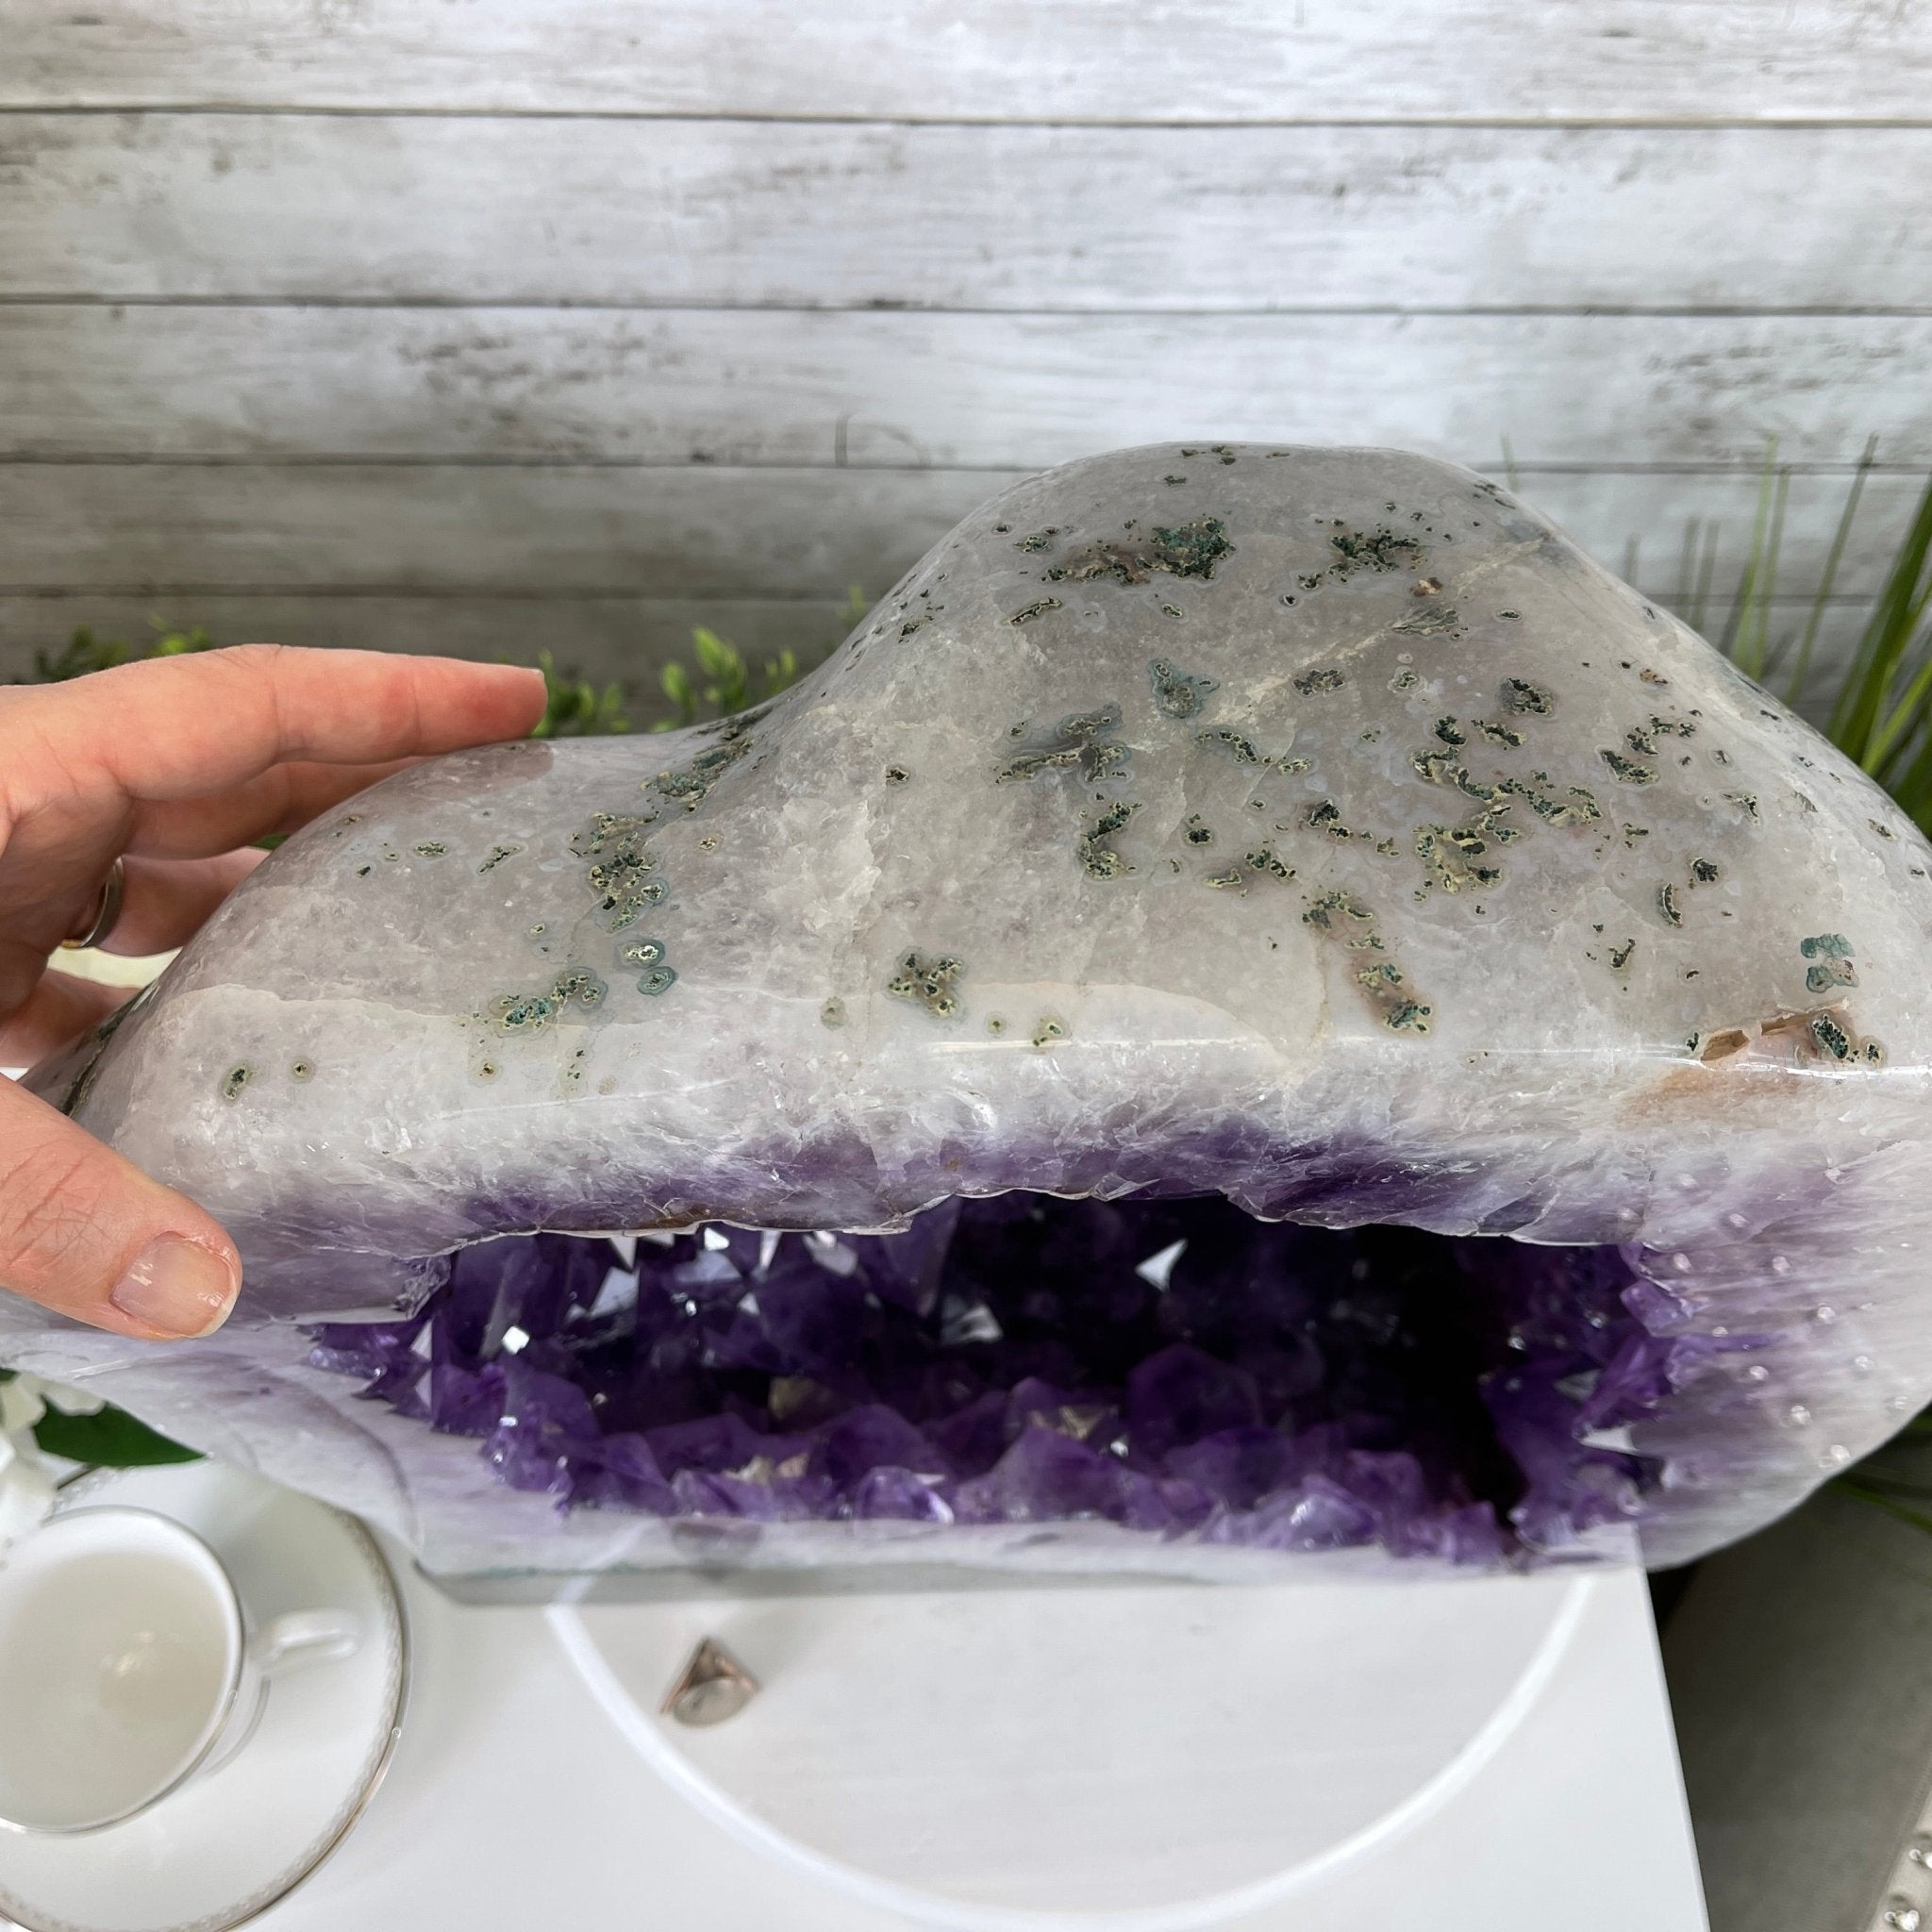 Extra Quality Polished Brazilian Amethyst Cathedral, 76.7 lbs & 16.75" tall Model #5602-0103 by Brazil Gems - Brazil GemsBrazil GemsExtra Quality Polished Brazilian Amethyst Cathedral, 76.7 lbs & 16.75" tall Model #5602-0103 by Brazil GemsPolished Cathedrals5602-0103